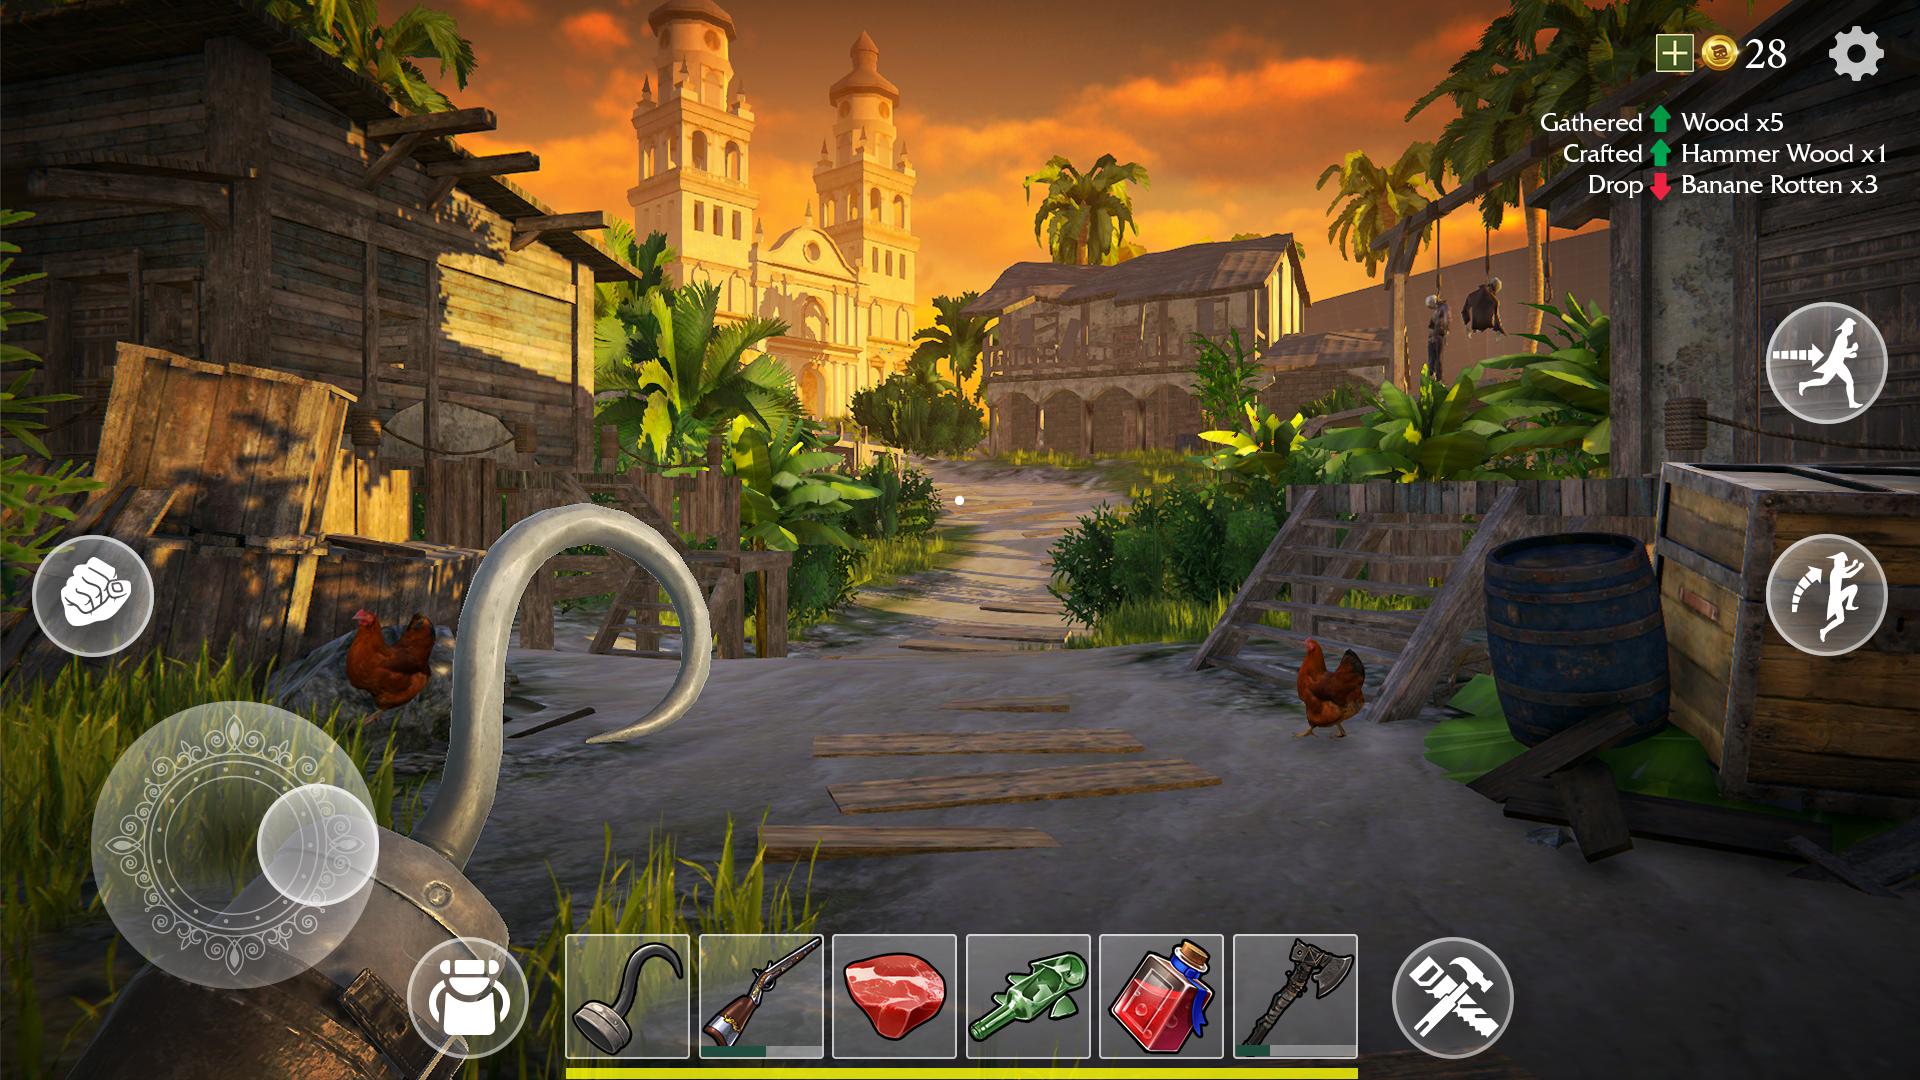 Last Pirate For Android Apk Download - the kraken new pirate game on roblox a pirates tale